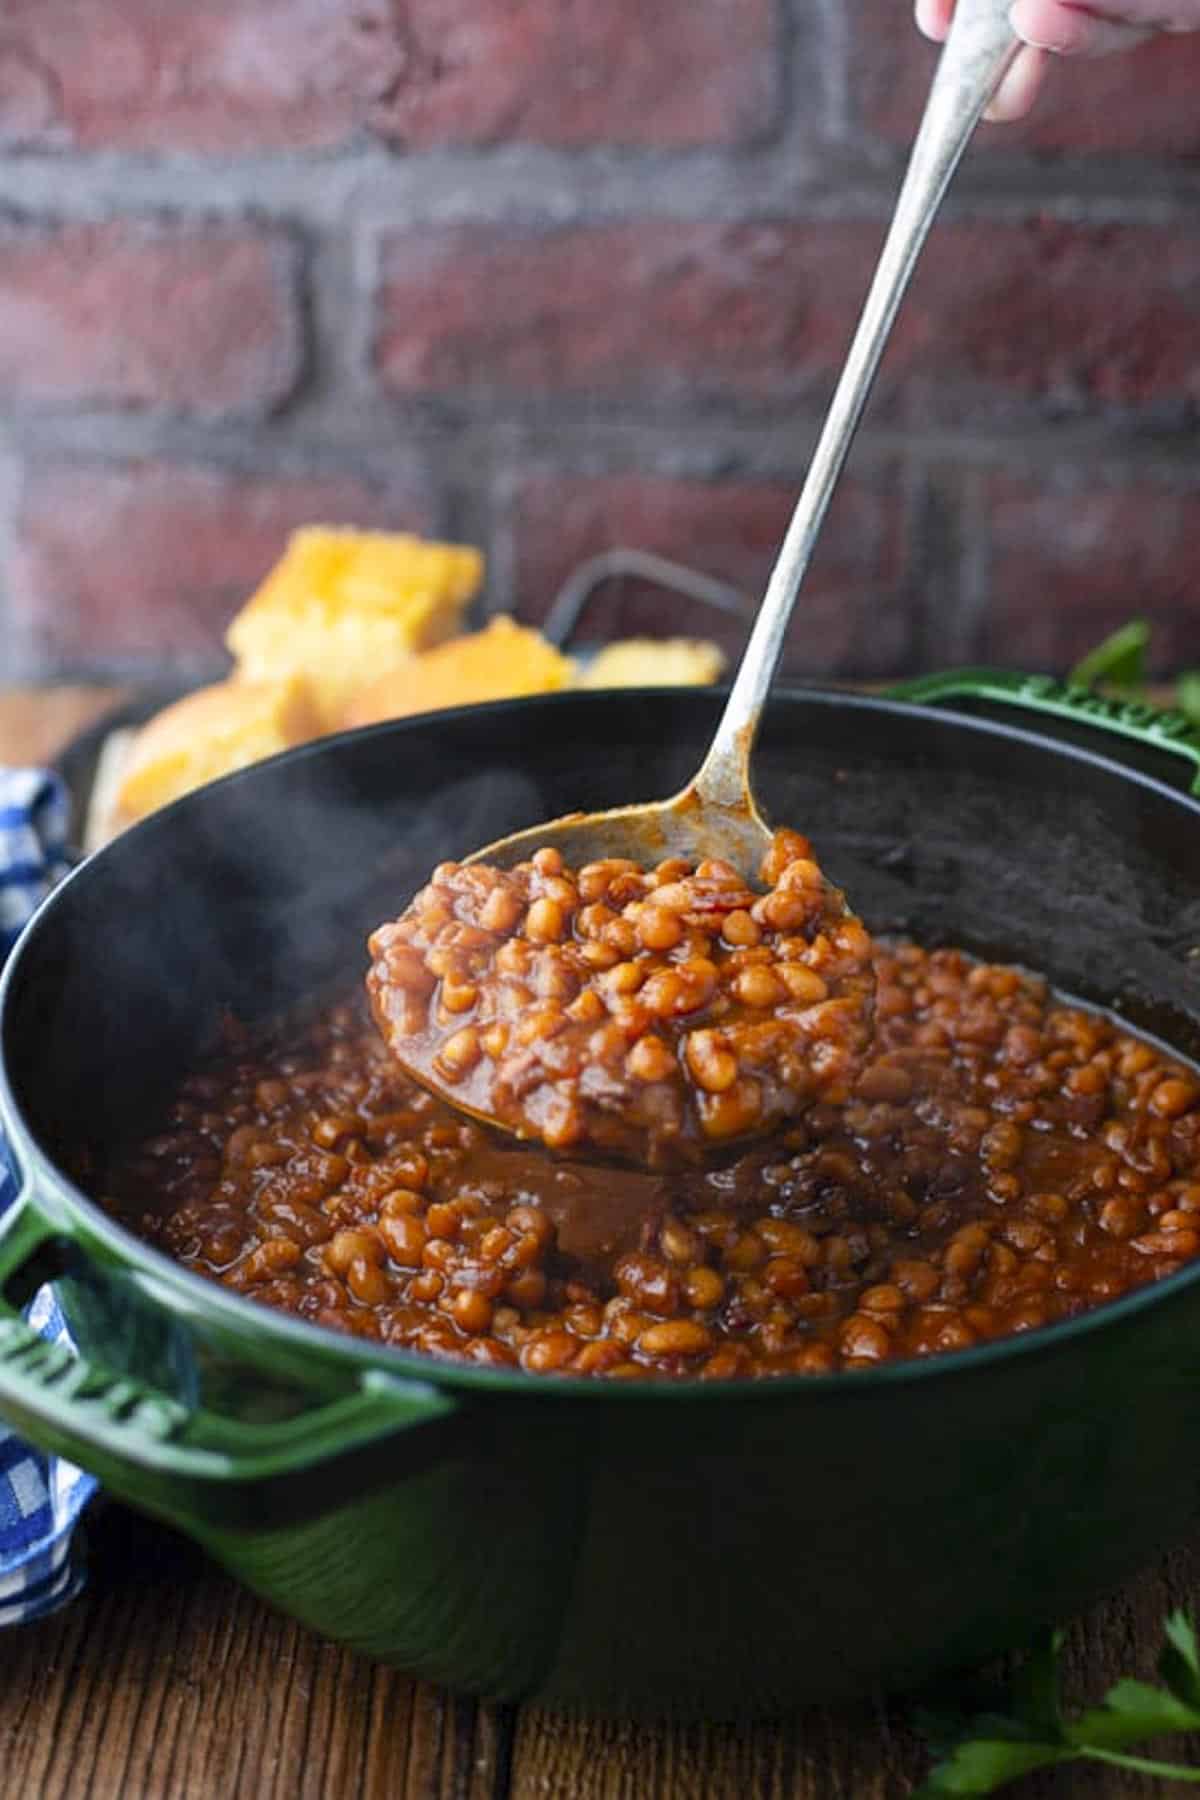 Ladle serving homemade baked beans from a Dutch oven.